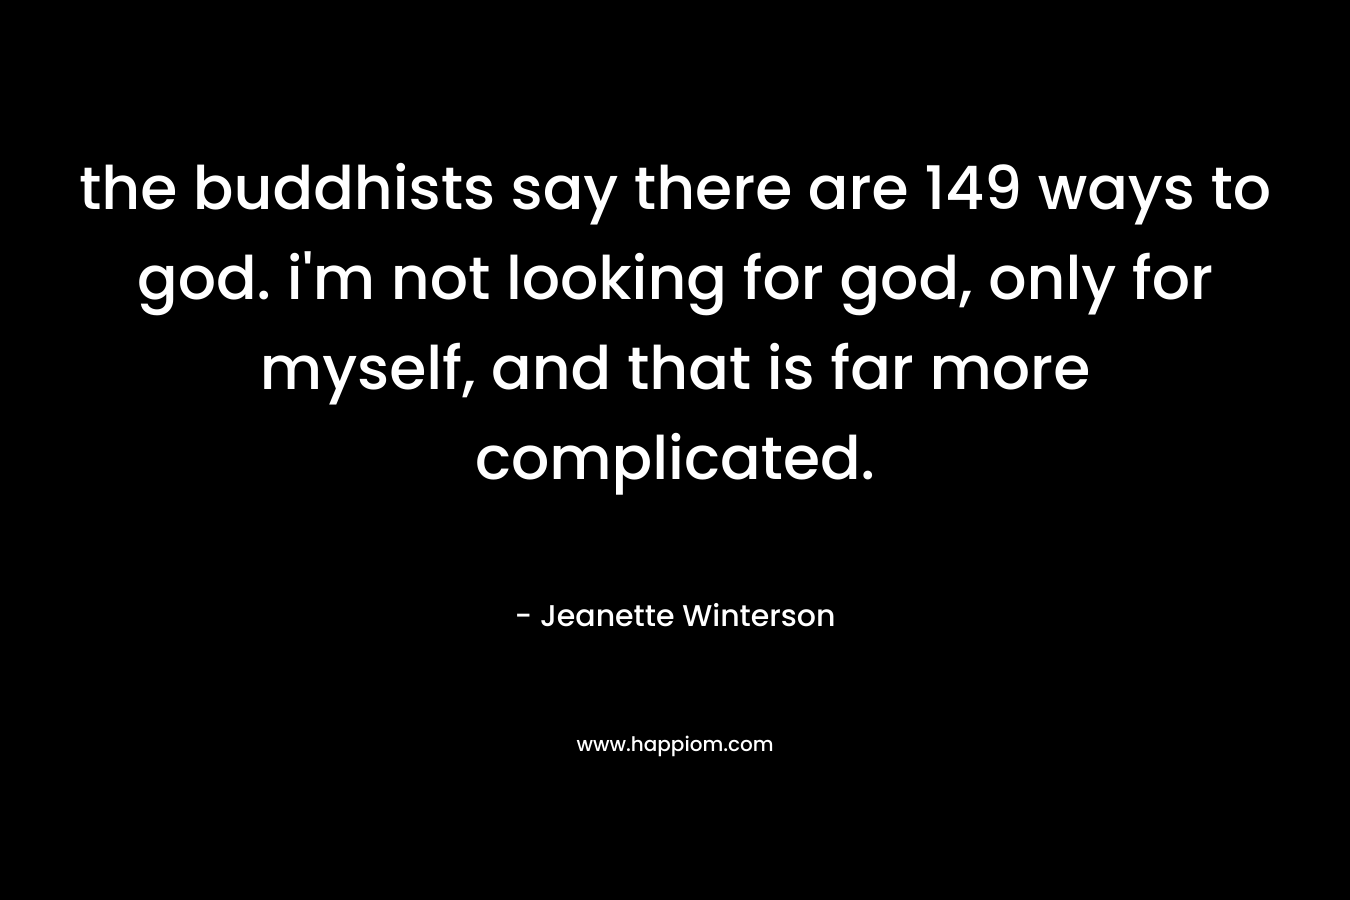 the buddhists say there are 149 ways to god. i’m not looking for god, only for myself, and that is far more complicated. – Jeanette Winterson